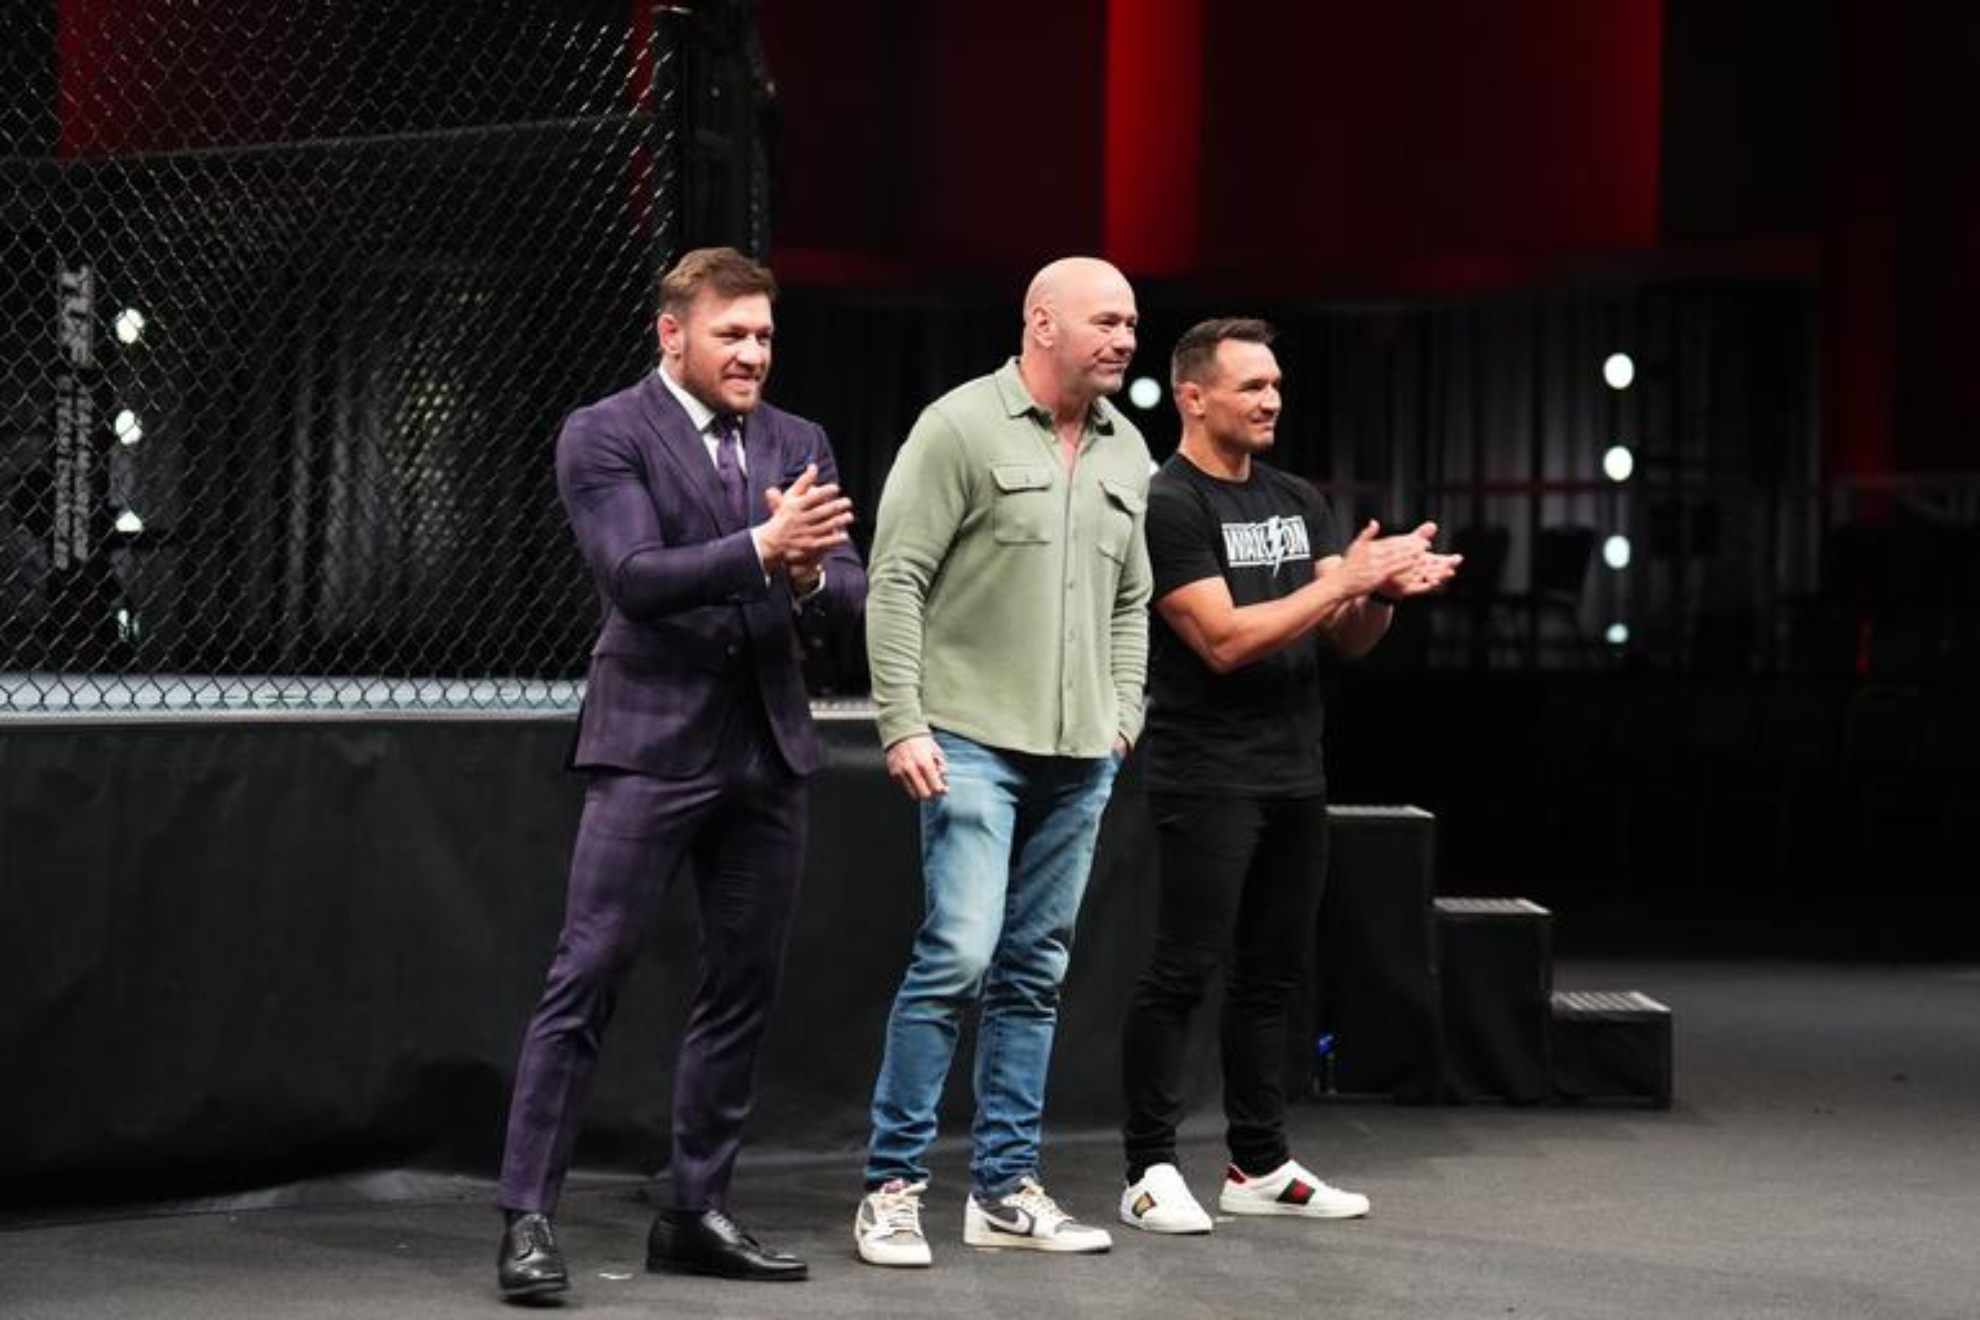 Michael Chandler, Dana White and Conor McGregor at The Ultimate Fighter